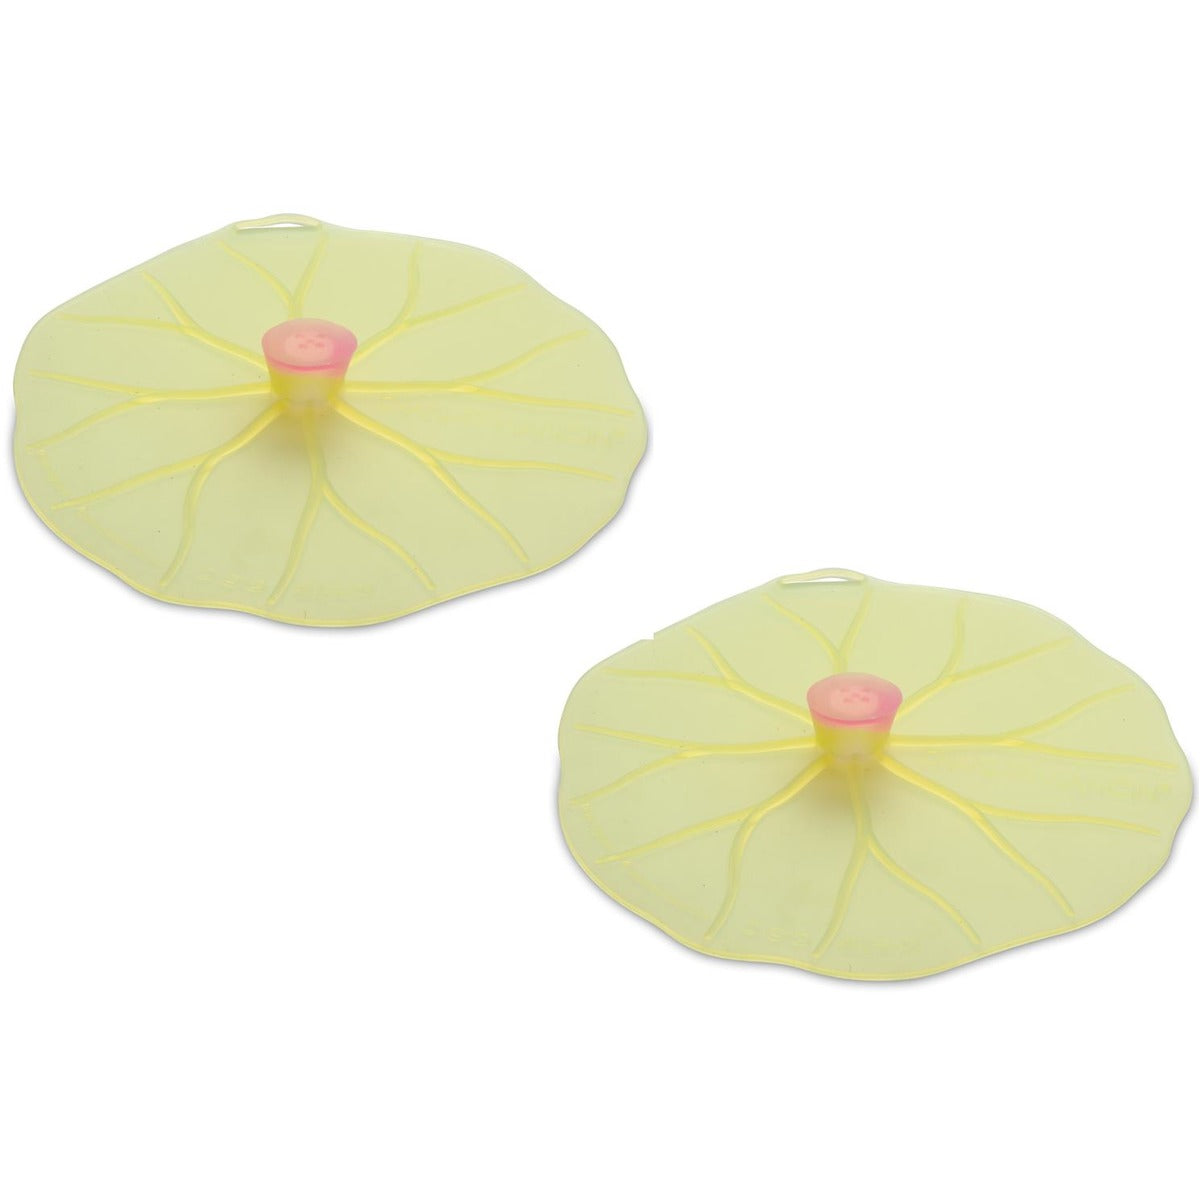 Charles Viancin - Lilypad Drink Covers